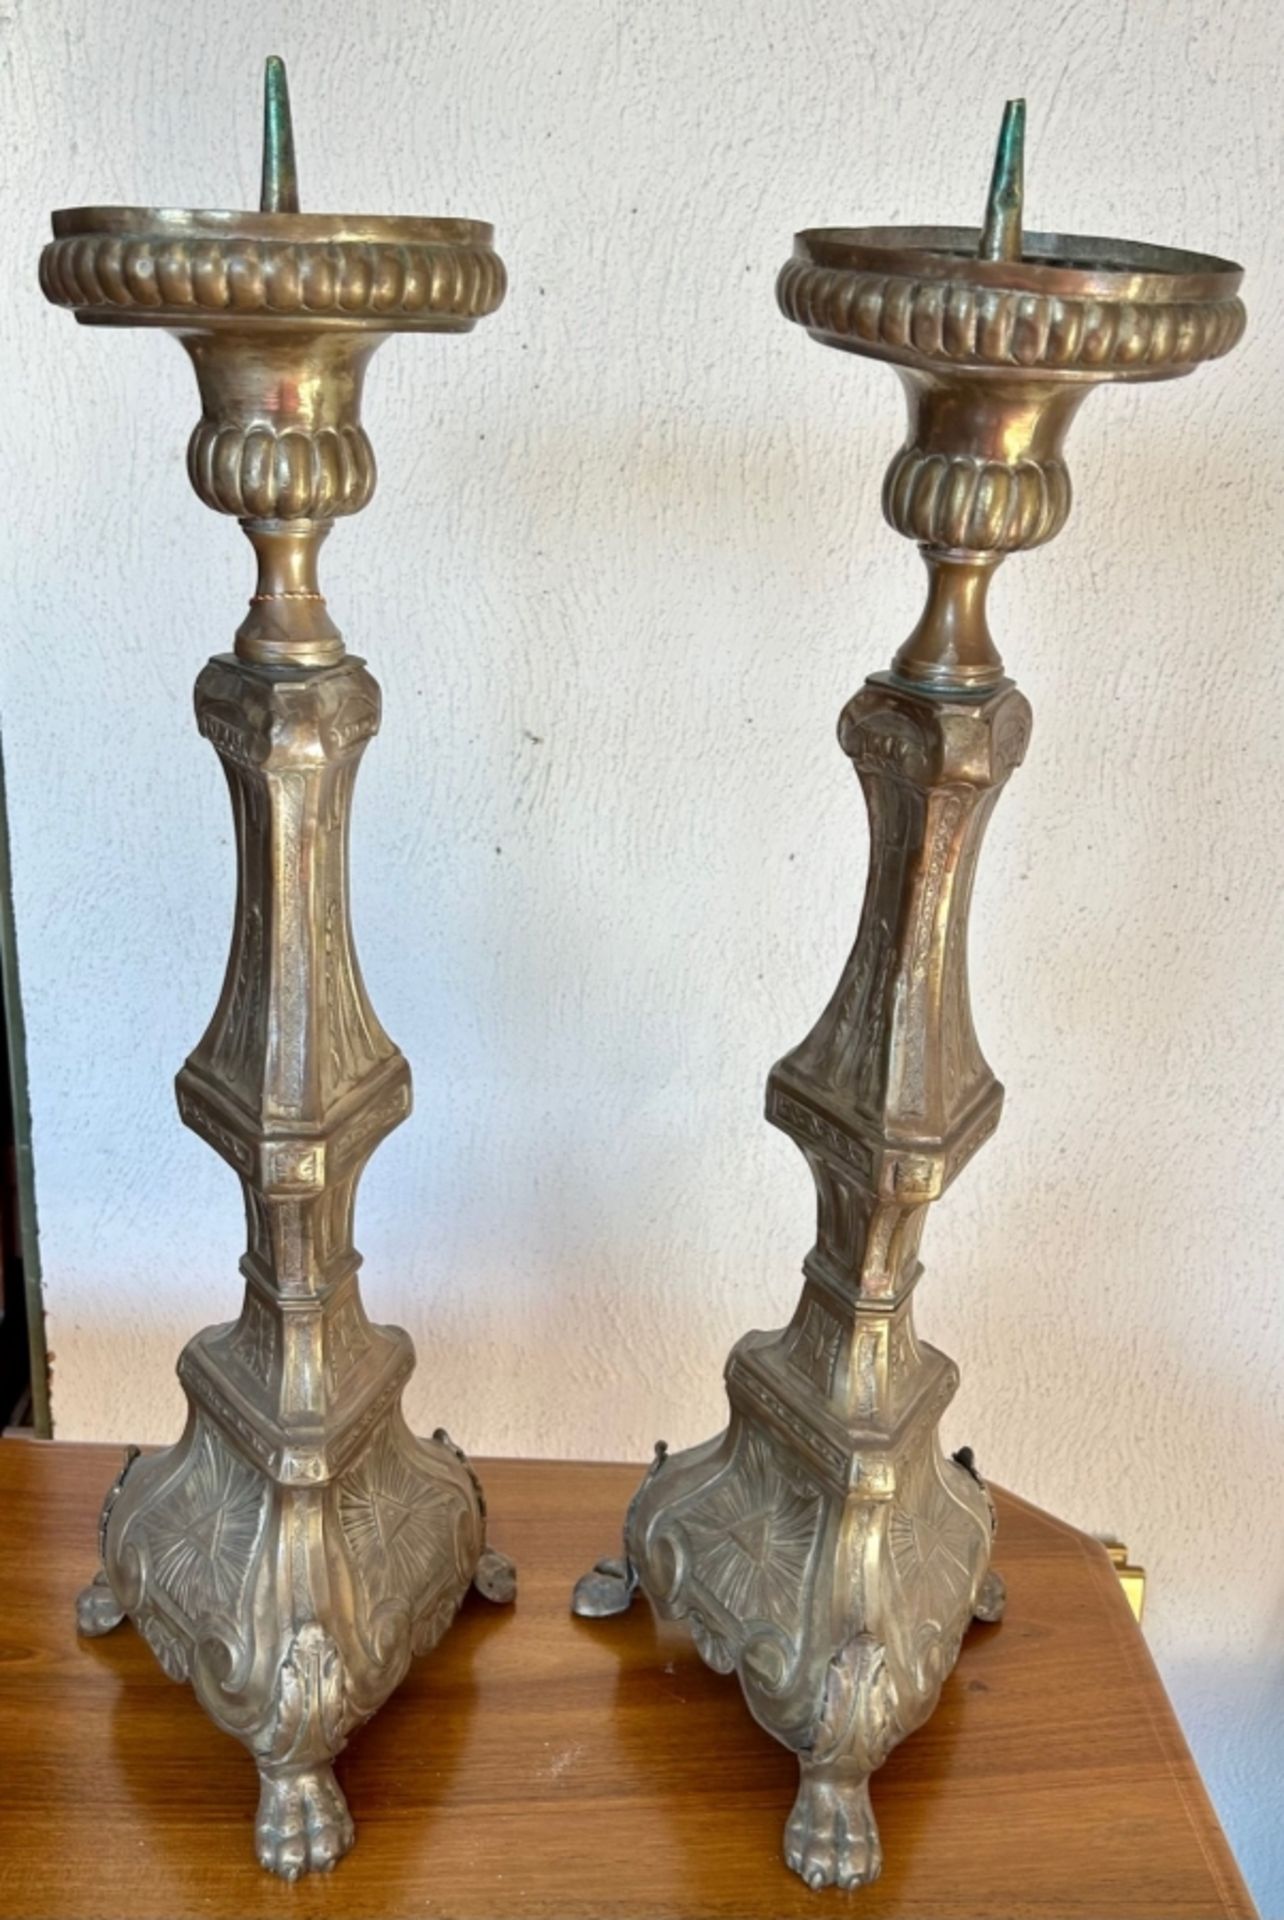 Pair of candlesticks, silver-plated brass, Germany, circa 1780, base with three lion feet, round ca - Image 2 of 4